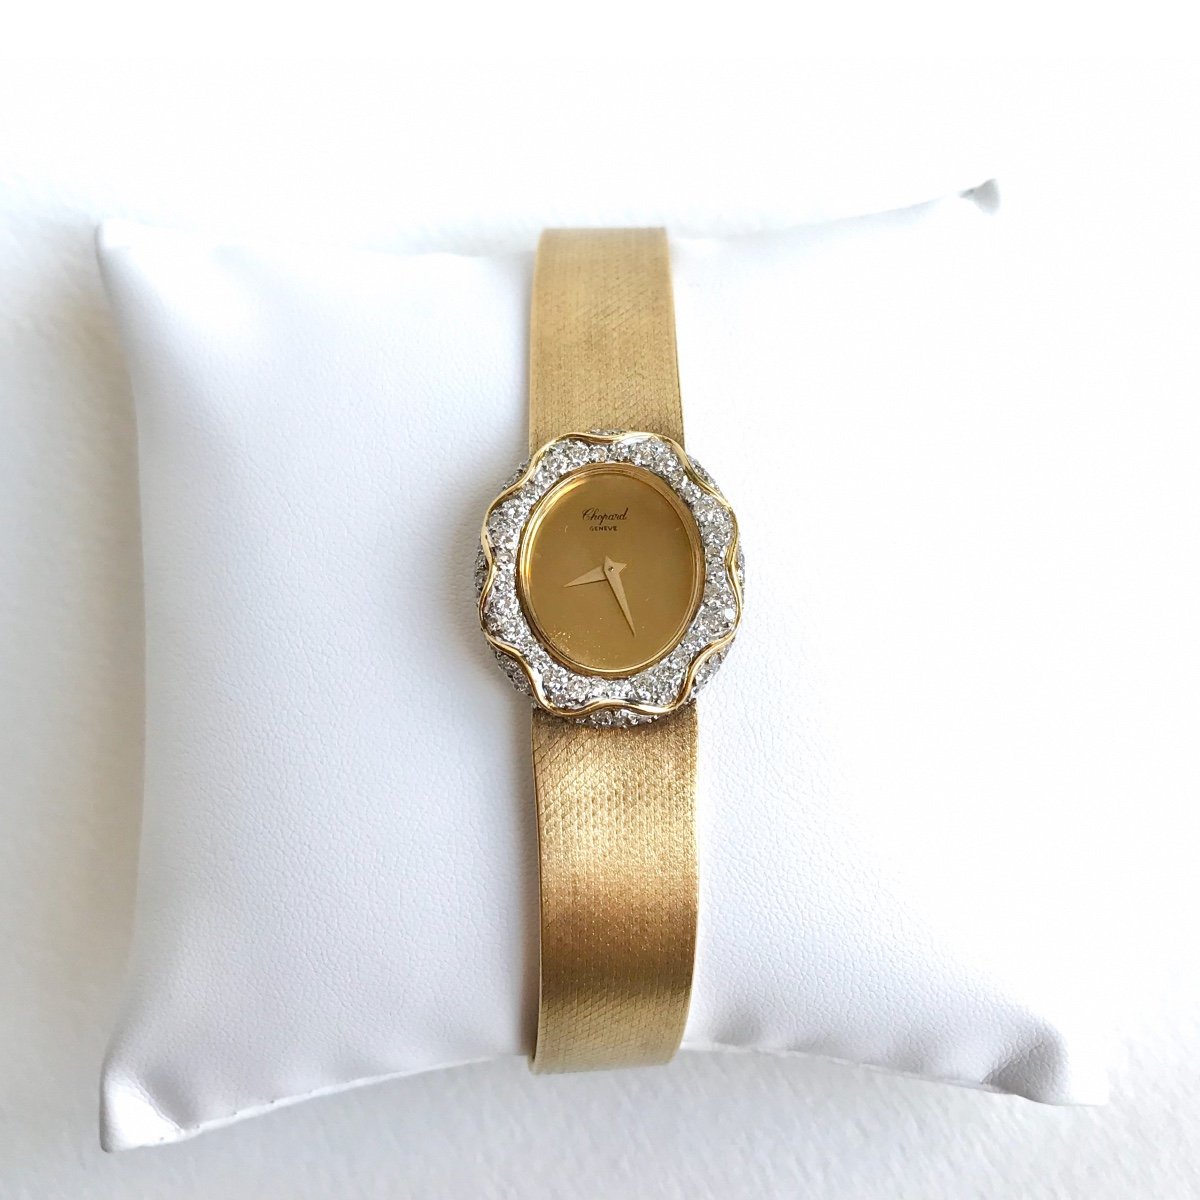 Chopard 1960 Watch In 18k Yellow Gold And Diamonds-photo-2